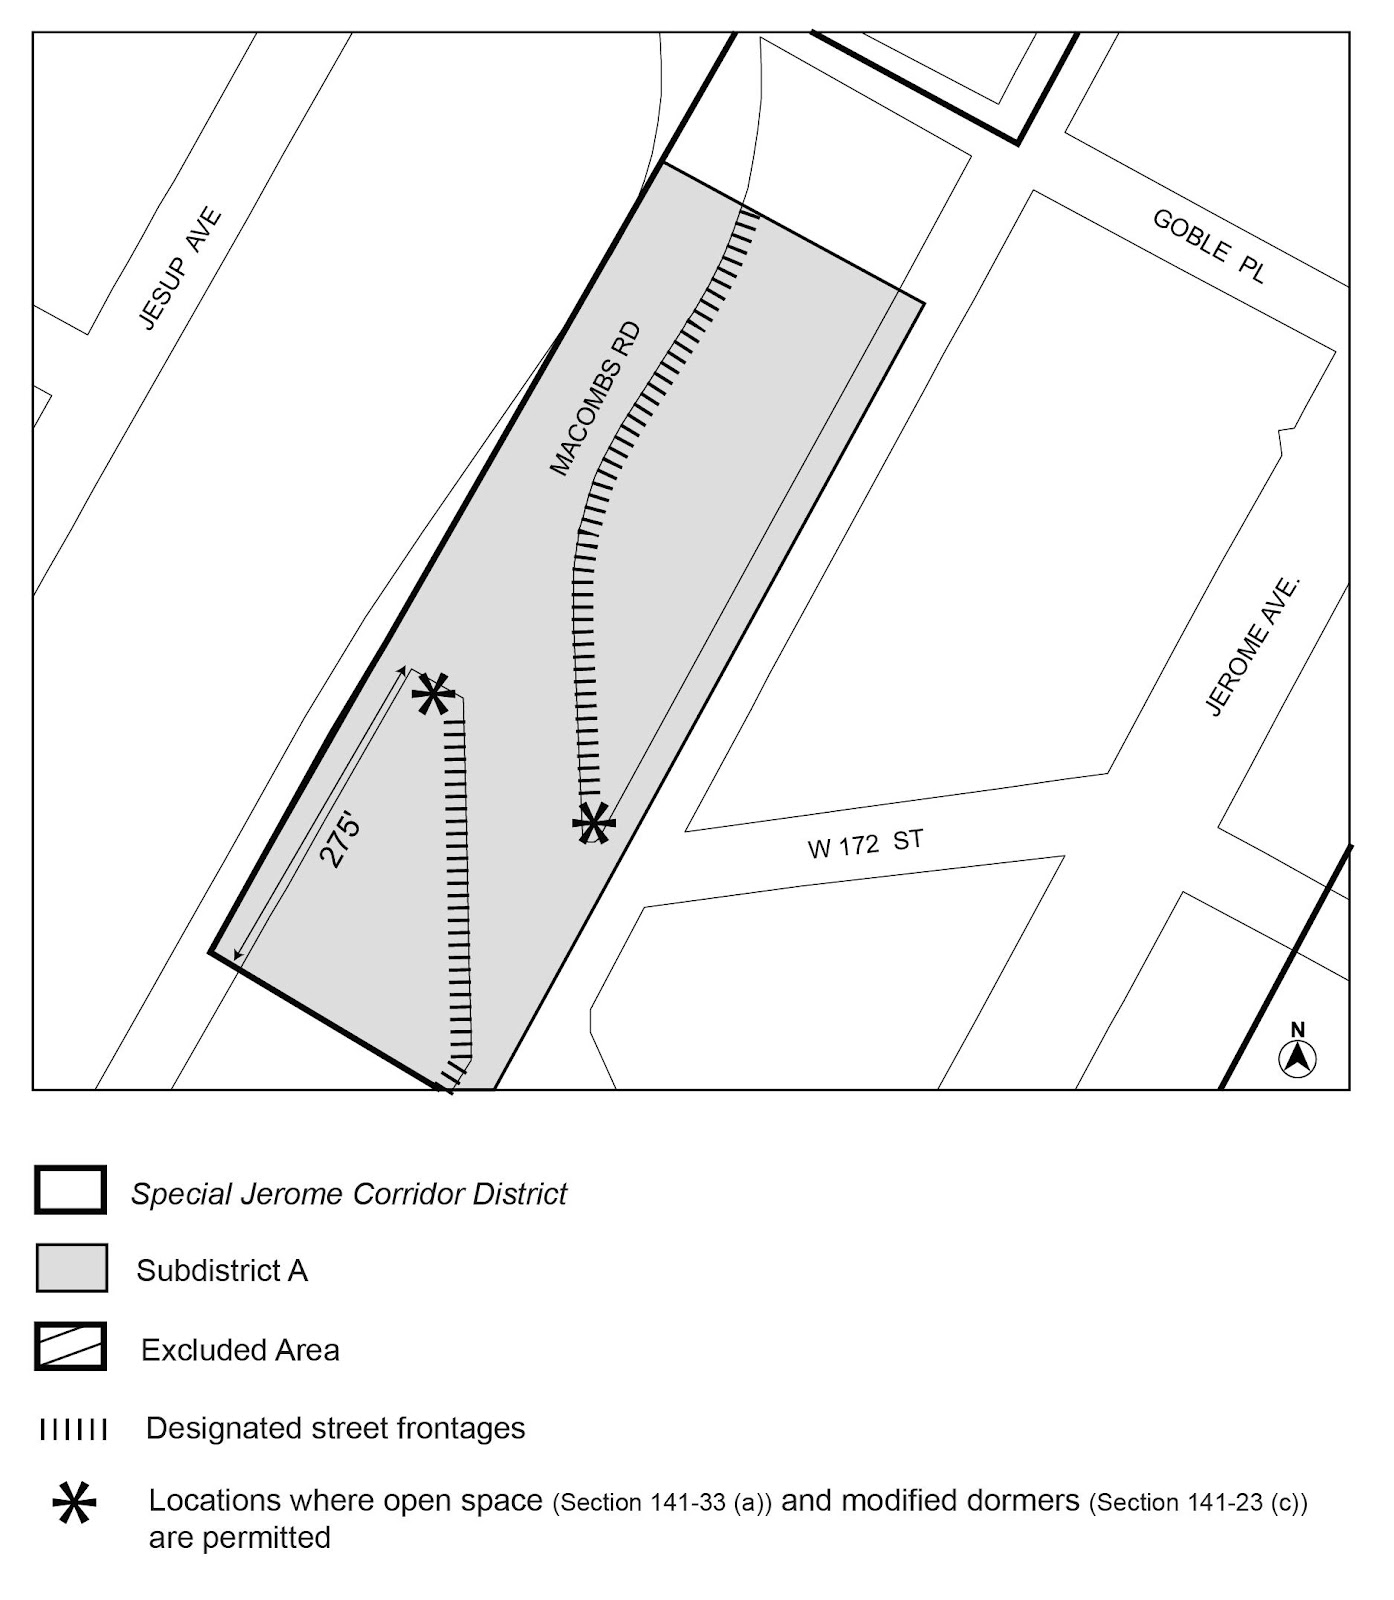 Zoning Resolutions Chapter 1: Special Jerome Corridor District APPENDIX.3